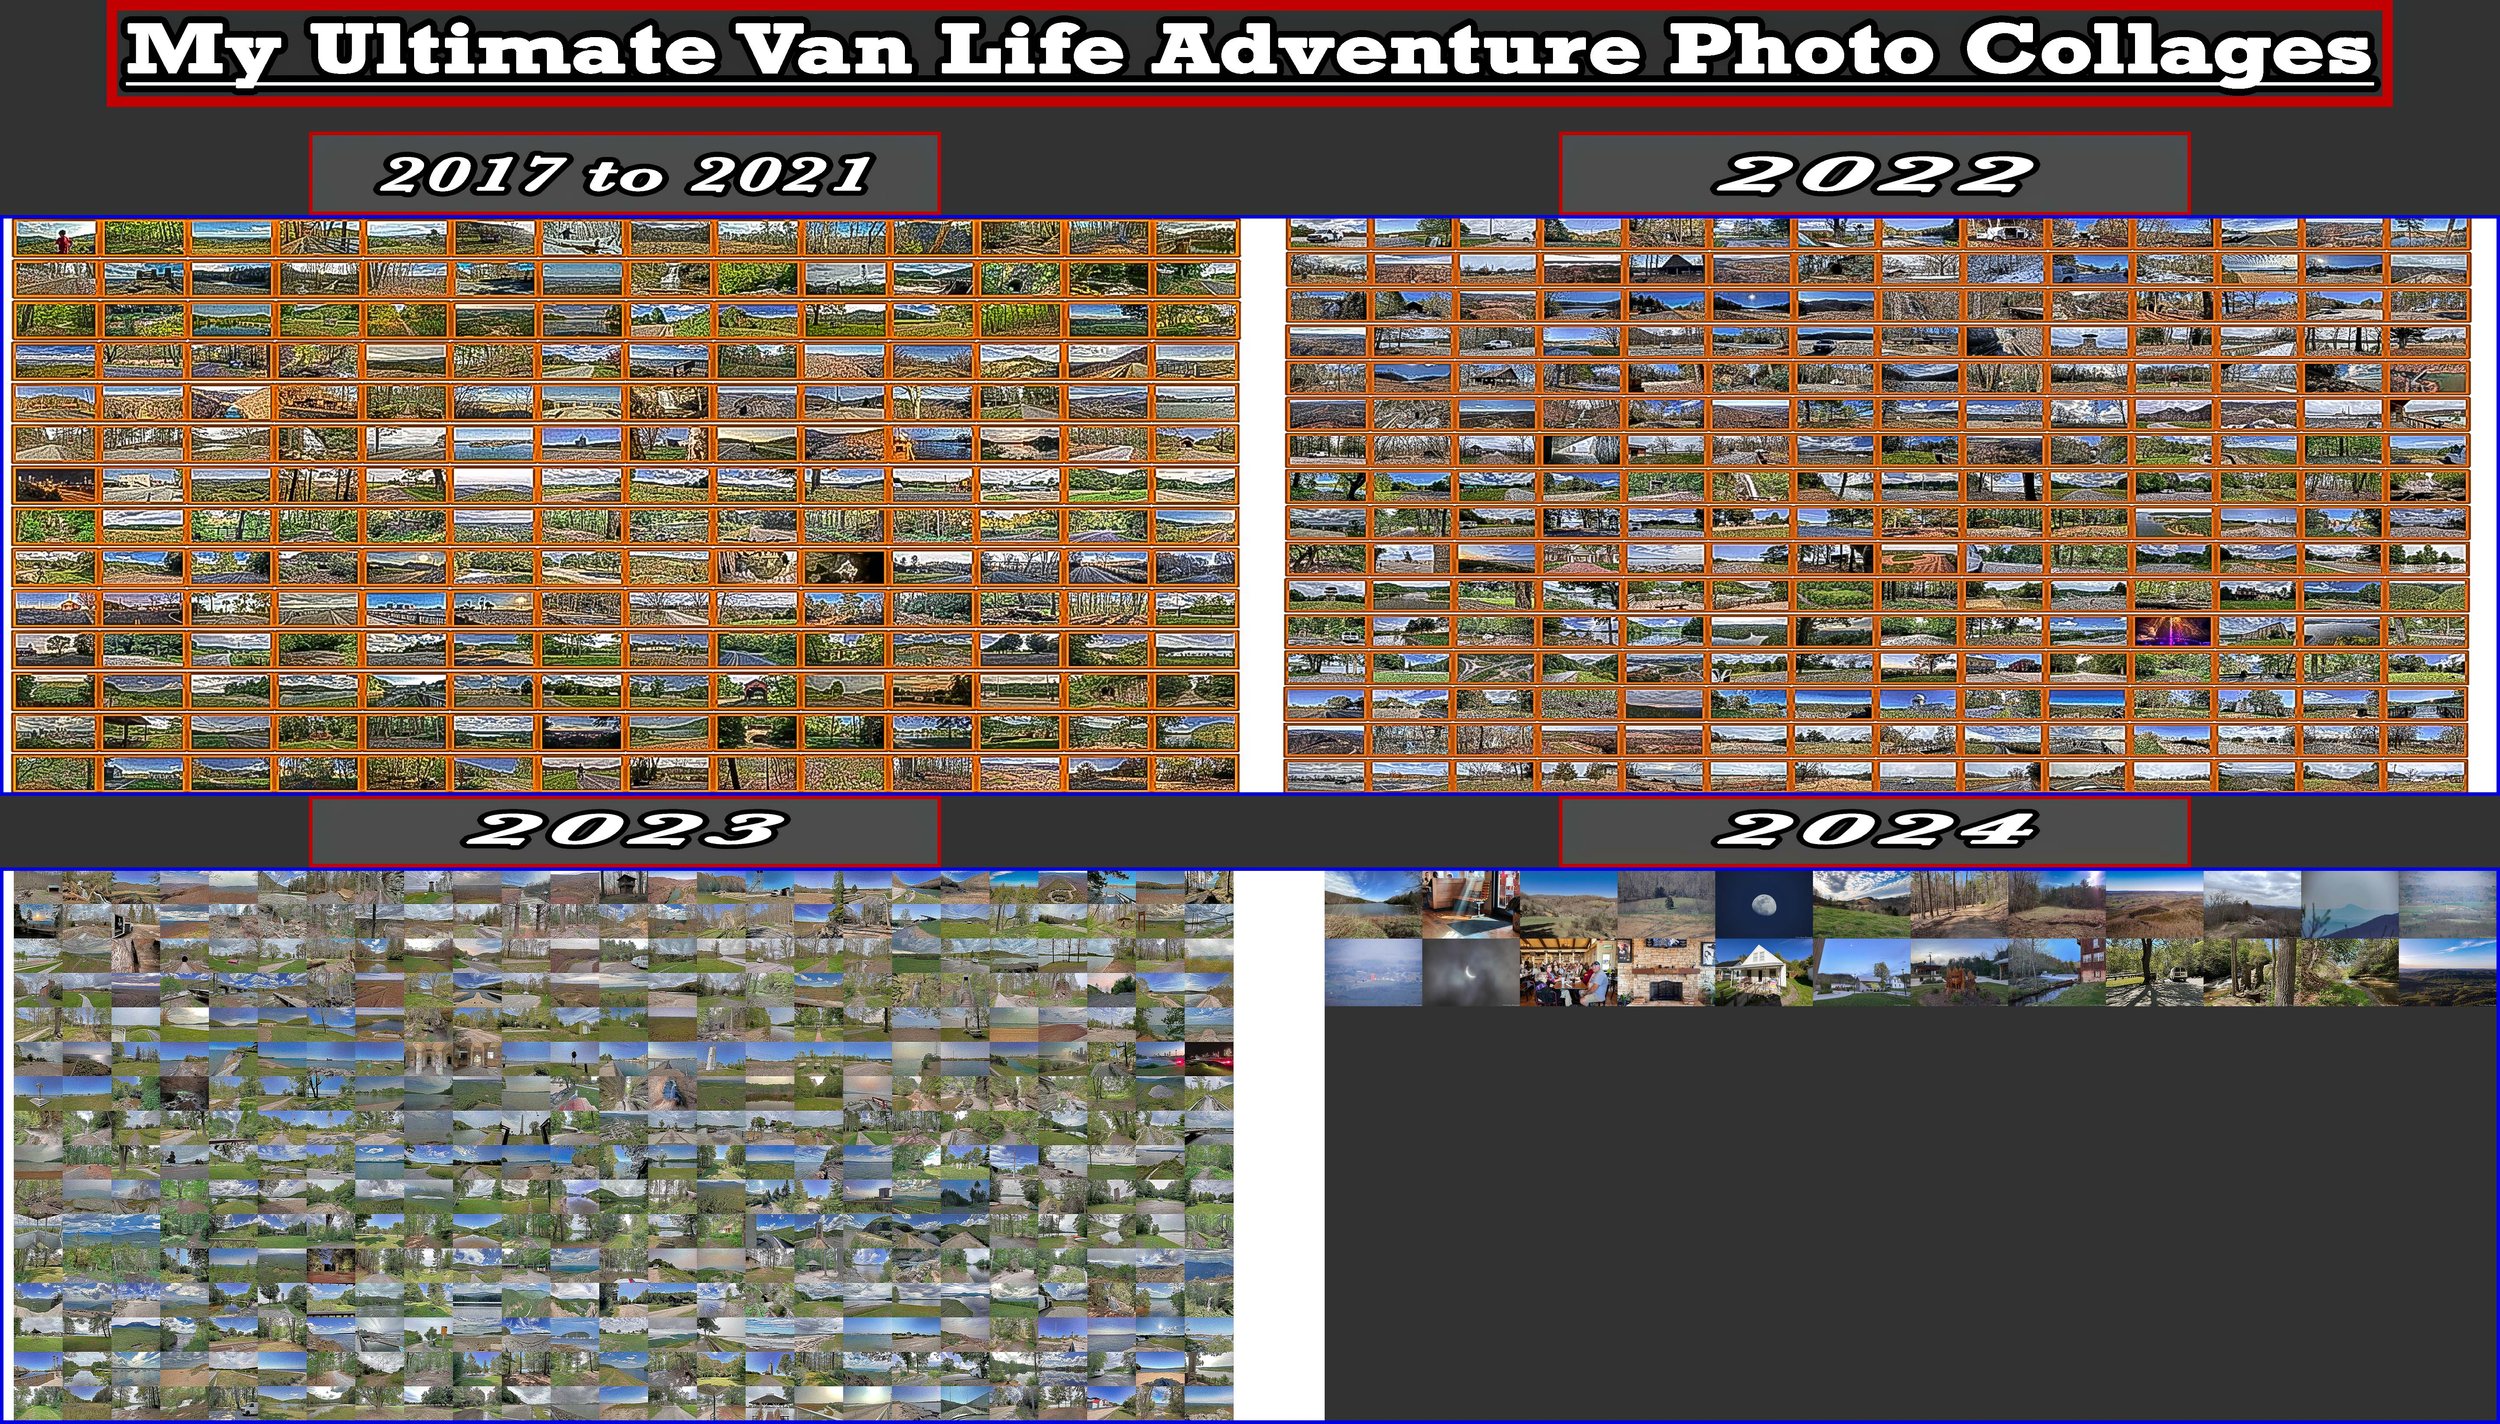 My Ultimate VLA Photo Collage Poster.jpg